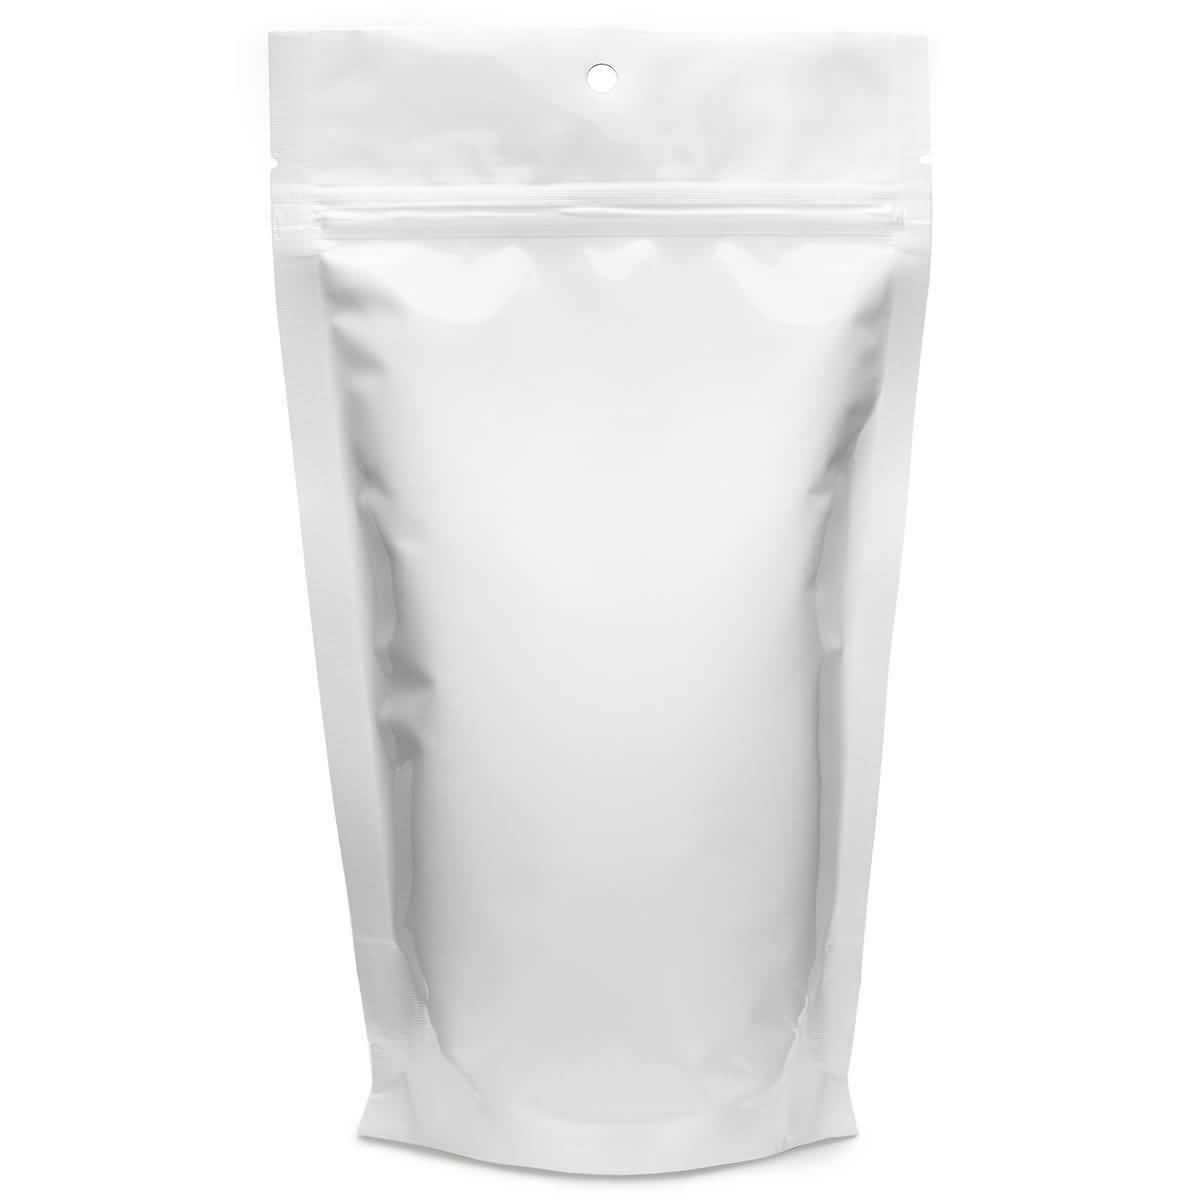 WHITE Stand Up Pouch w/Tear Notch Zip Bags 100/Bx NEW 3 x 5 MYLAR Opaque WHITE 